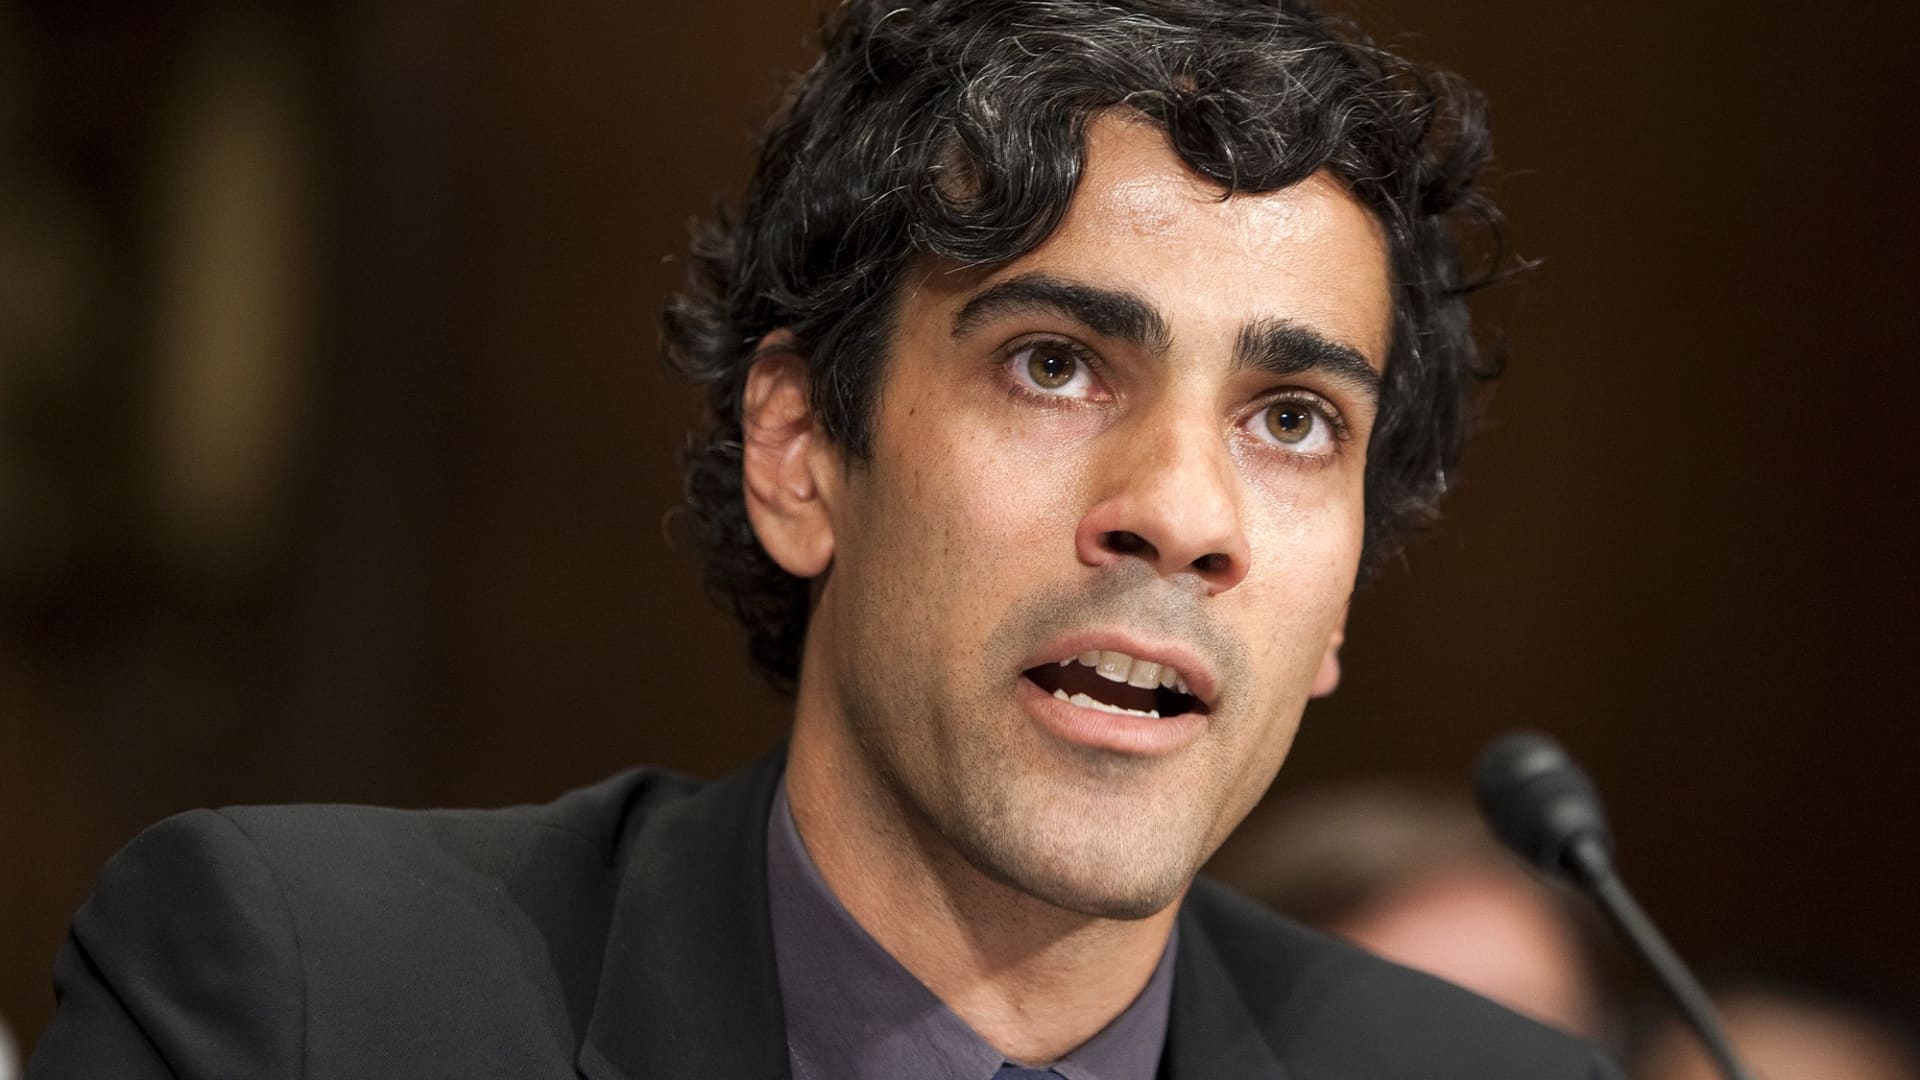 Jeremy Stoppelman, co-founder and chief executive officer of Yelp Inc., testifies at a hearing of the Senate Judiciary Committee's antitrust subcommittee in Washington, D.C., U.S., on Wednesday, Sept. 21, 2011.